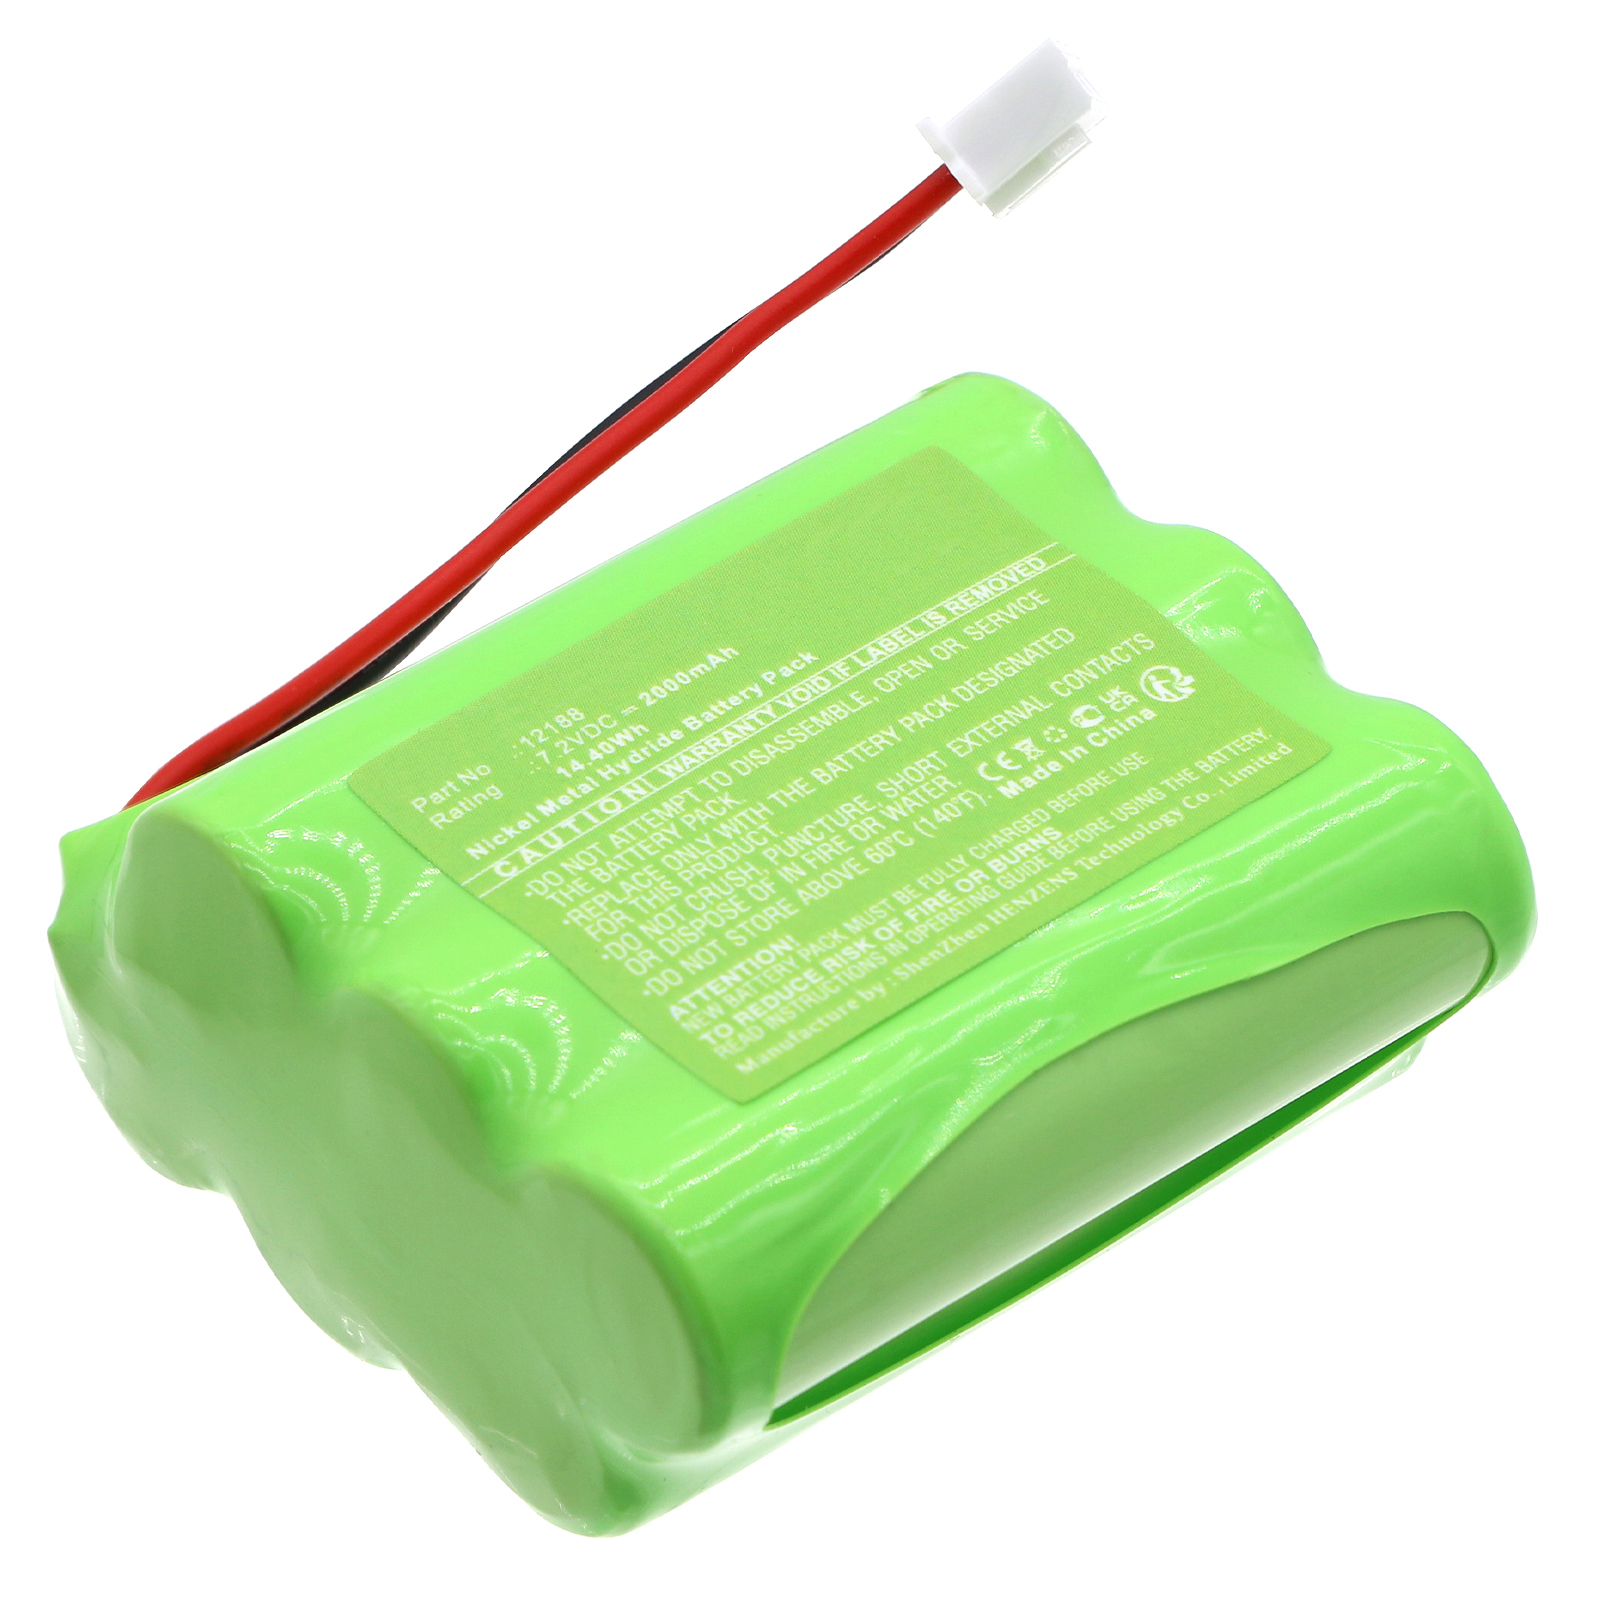 Batteries for LUPUSAutomatic Doors